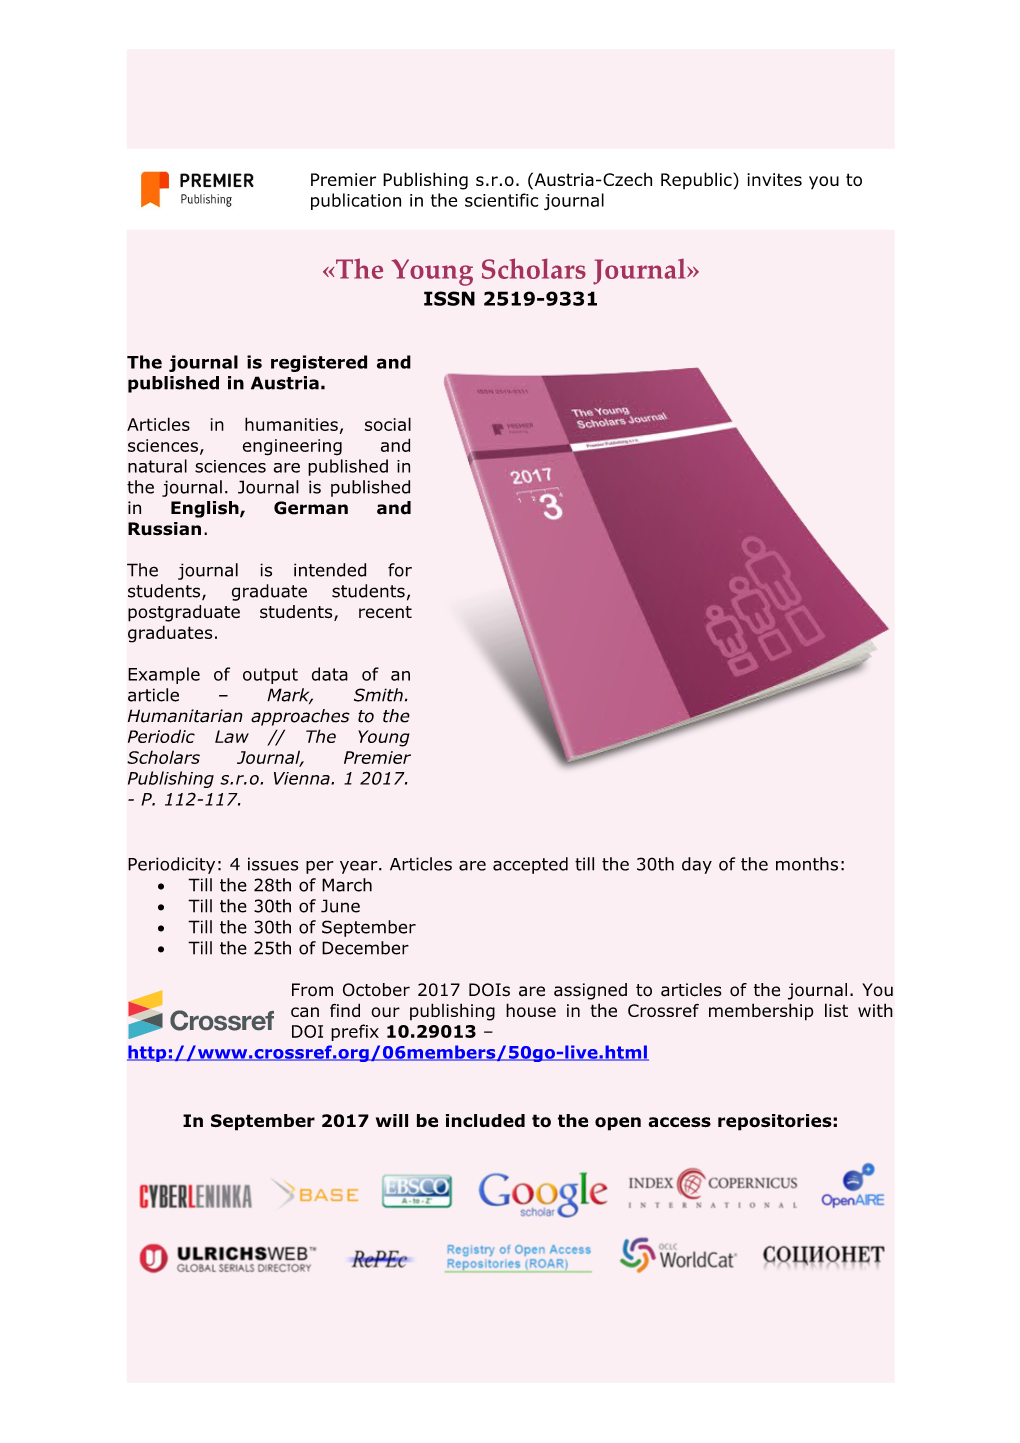 The Young Scholars Journal